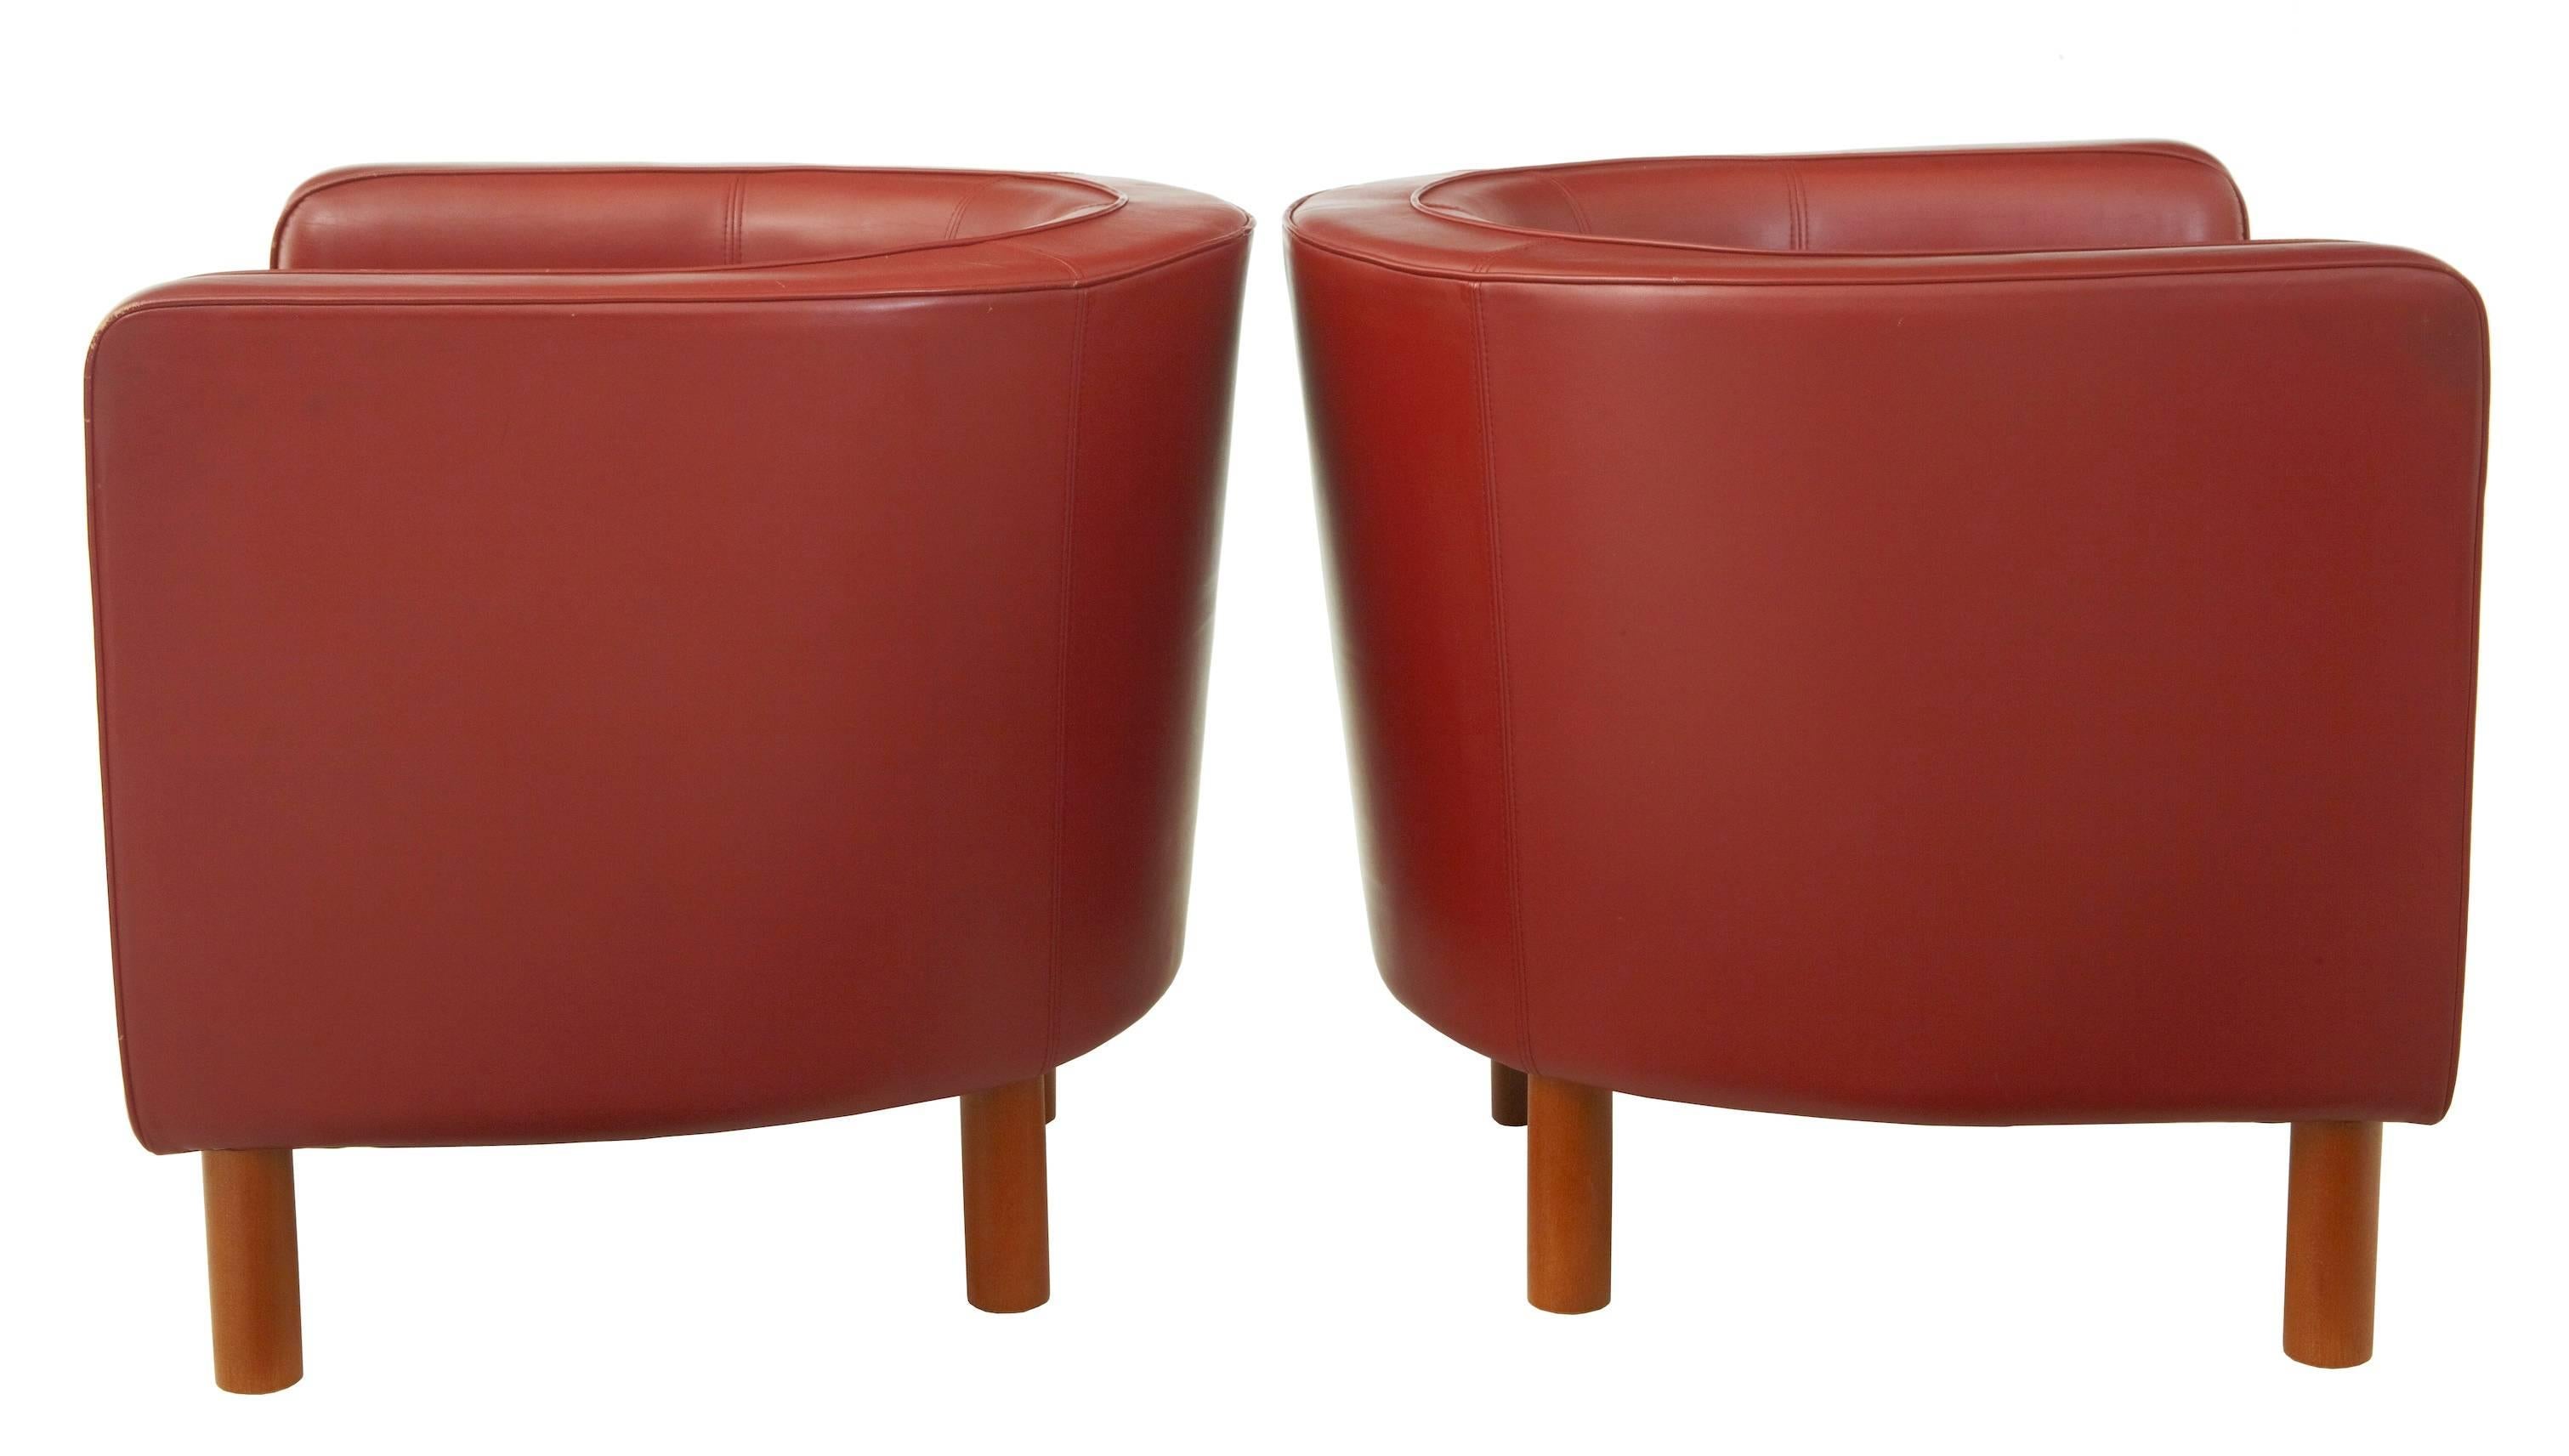 Fine quality leather lounge club armchairs in the Art Deco taste.
Upholstered in rusty red leather.
Beech round legs and exposed front under frame
Very comfortable and stylish.

Some minor wear to leather piping. Minor scuff marks

Measures: